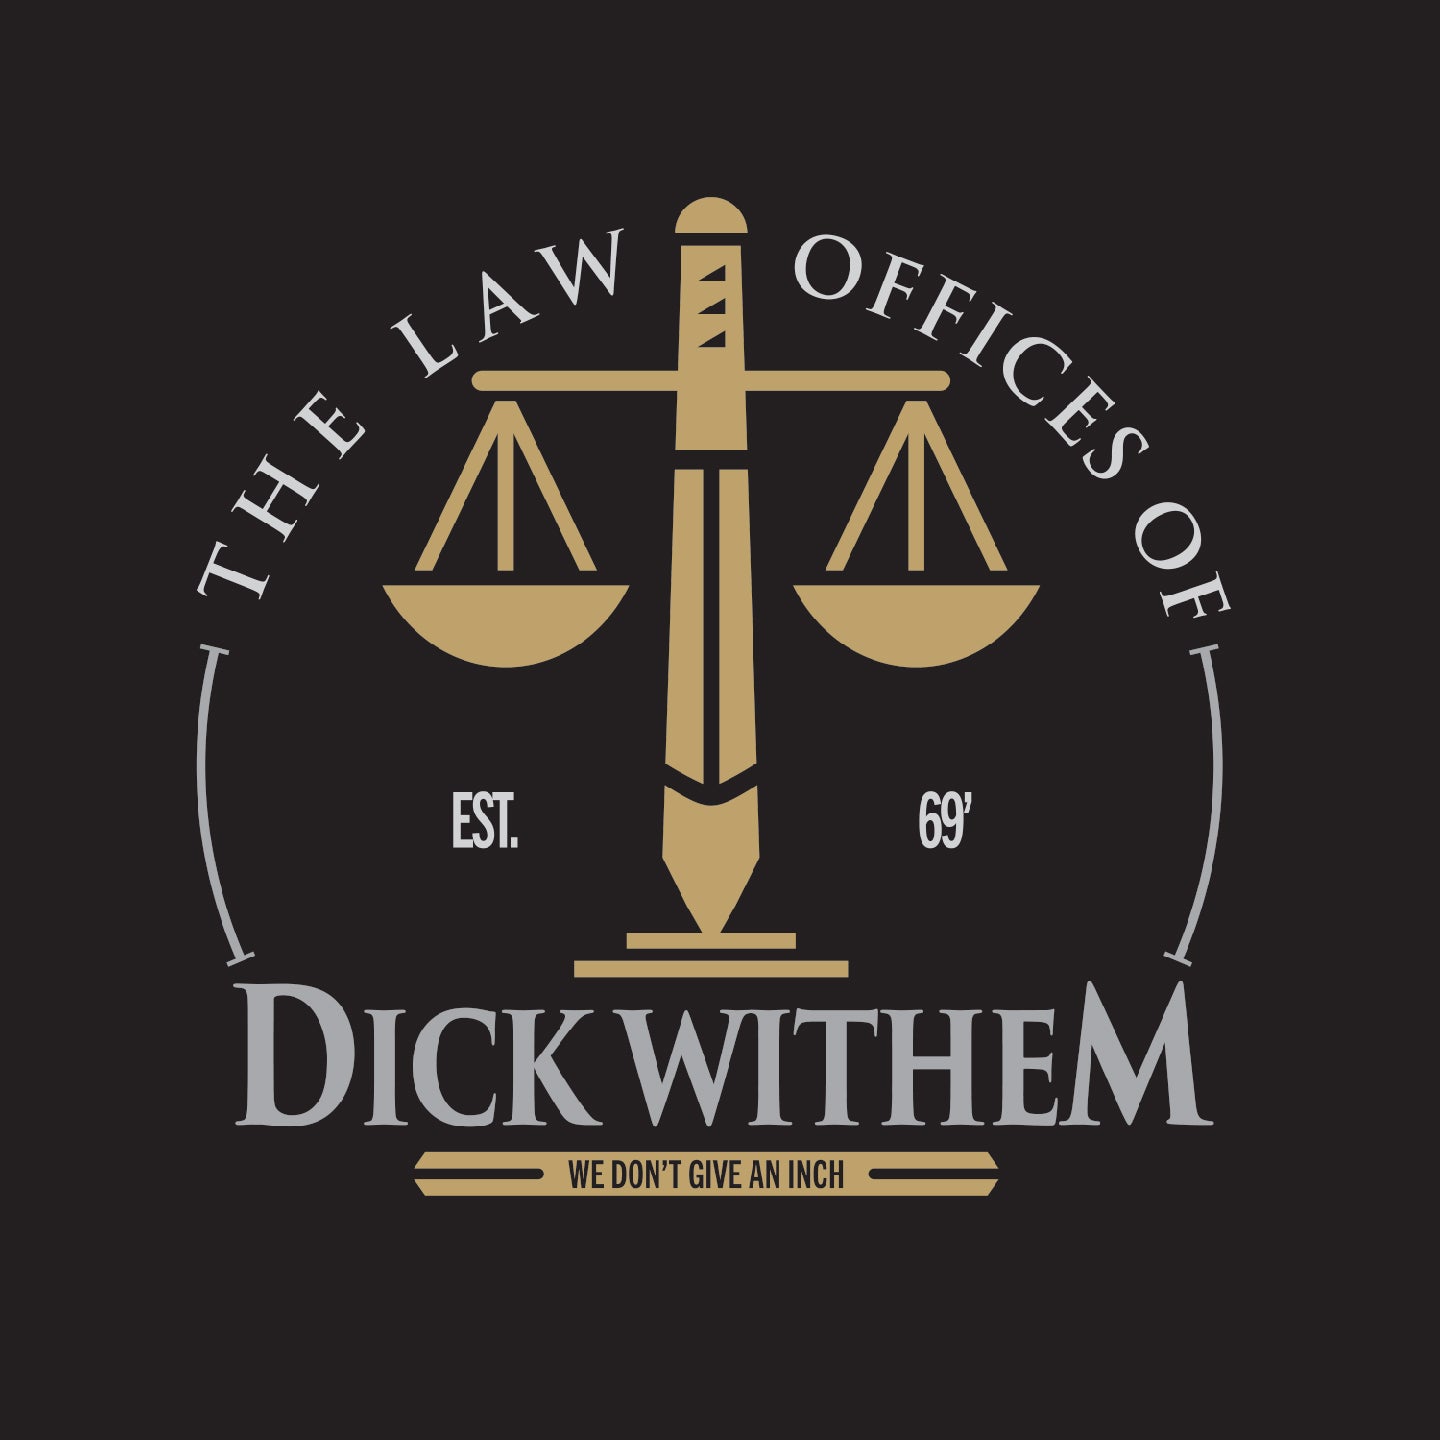 Law Office of Dick Withem